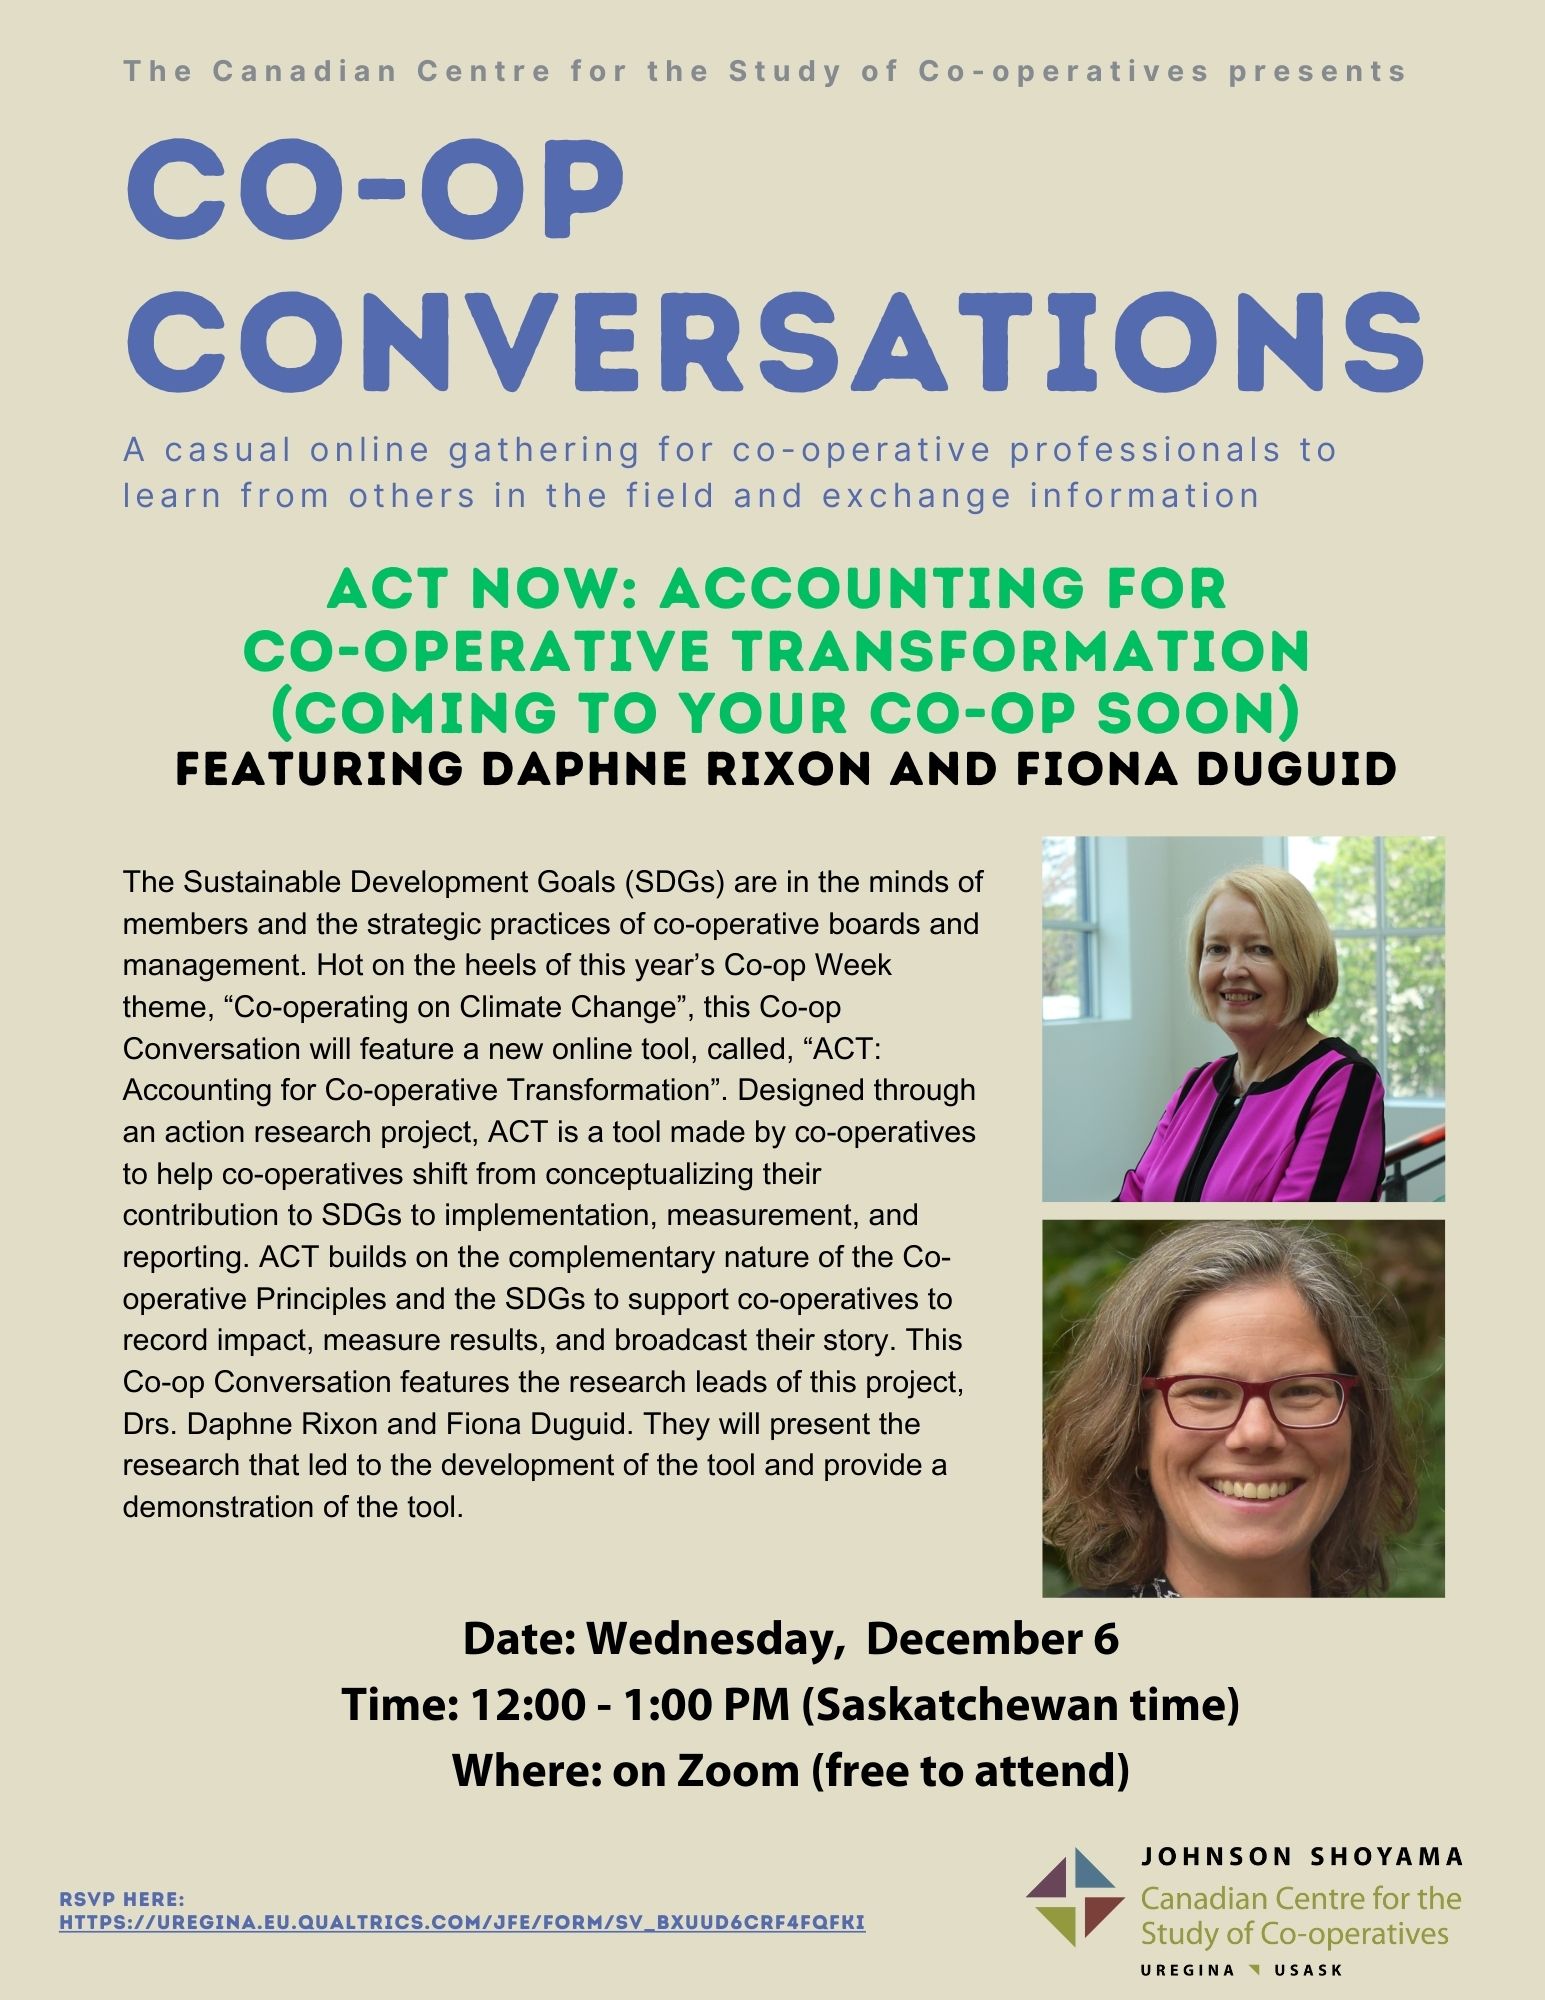 Co-op Conversation featuring Drs. Daphne Rixon and Fiona Duguid